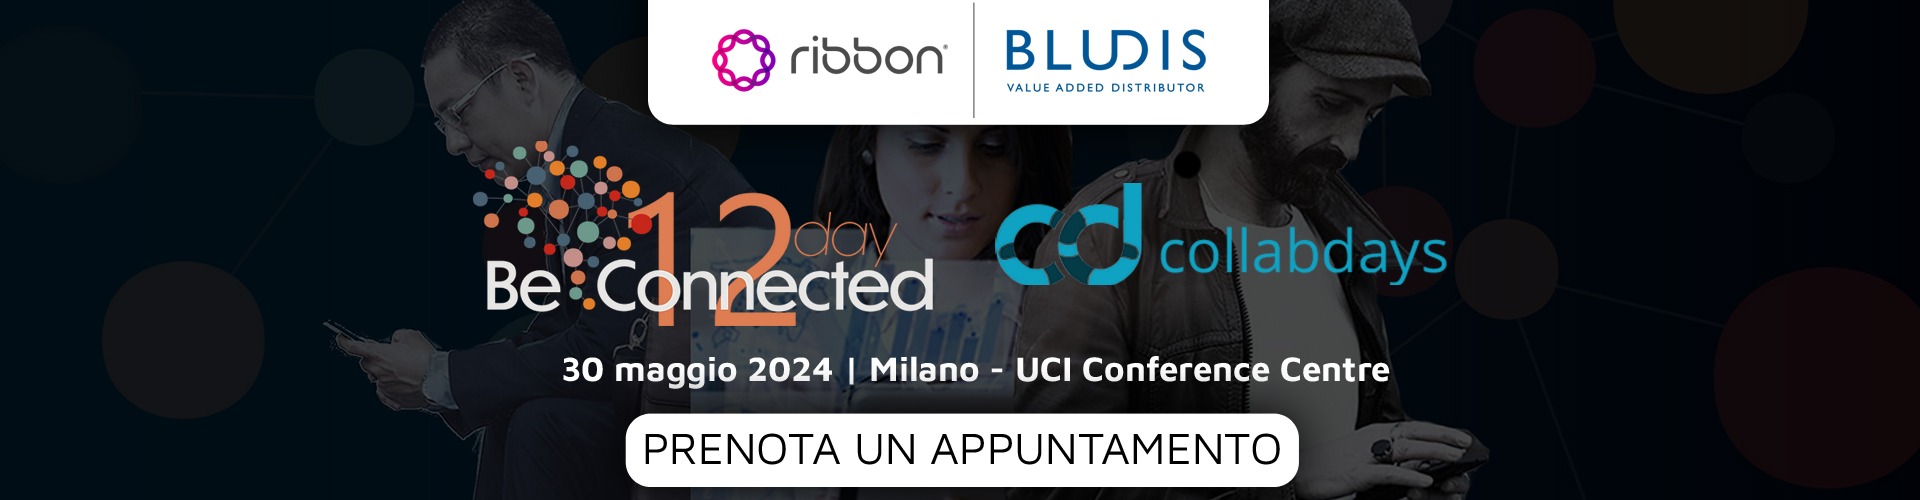 BeConnected Day | CollabsDay | Bludis | Ribbon